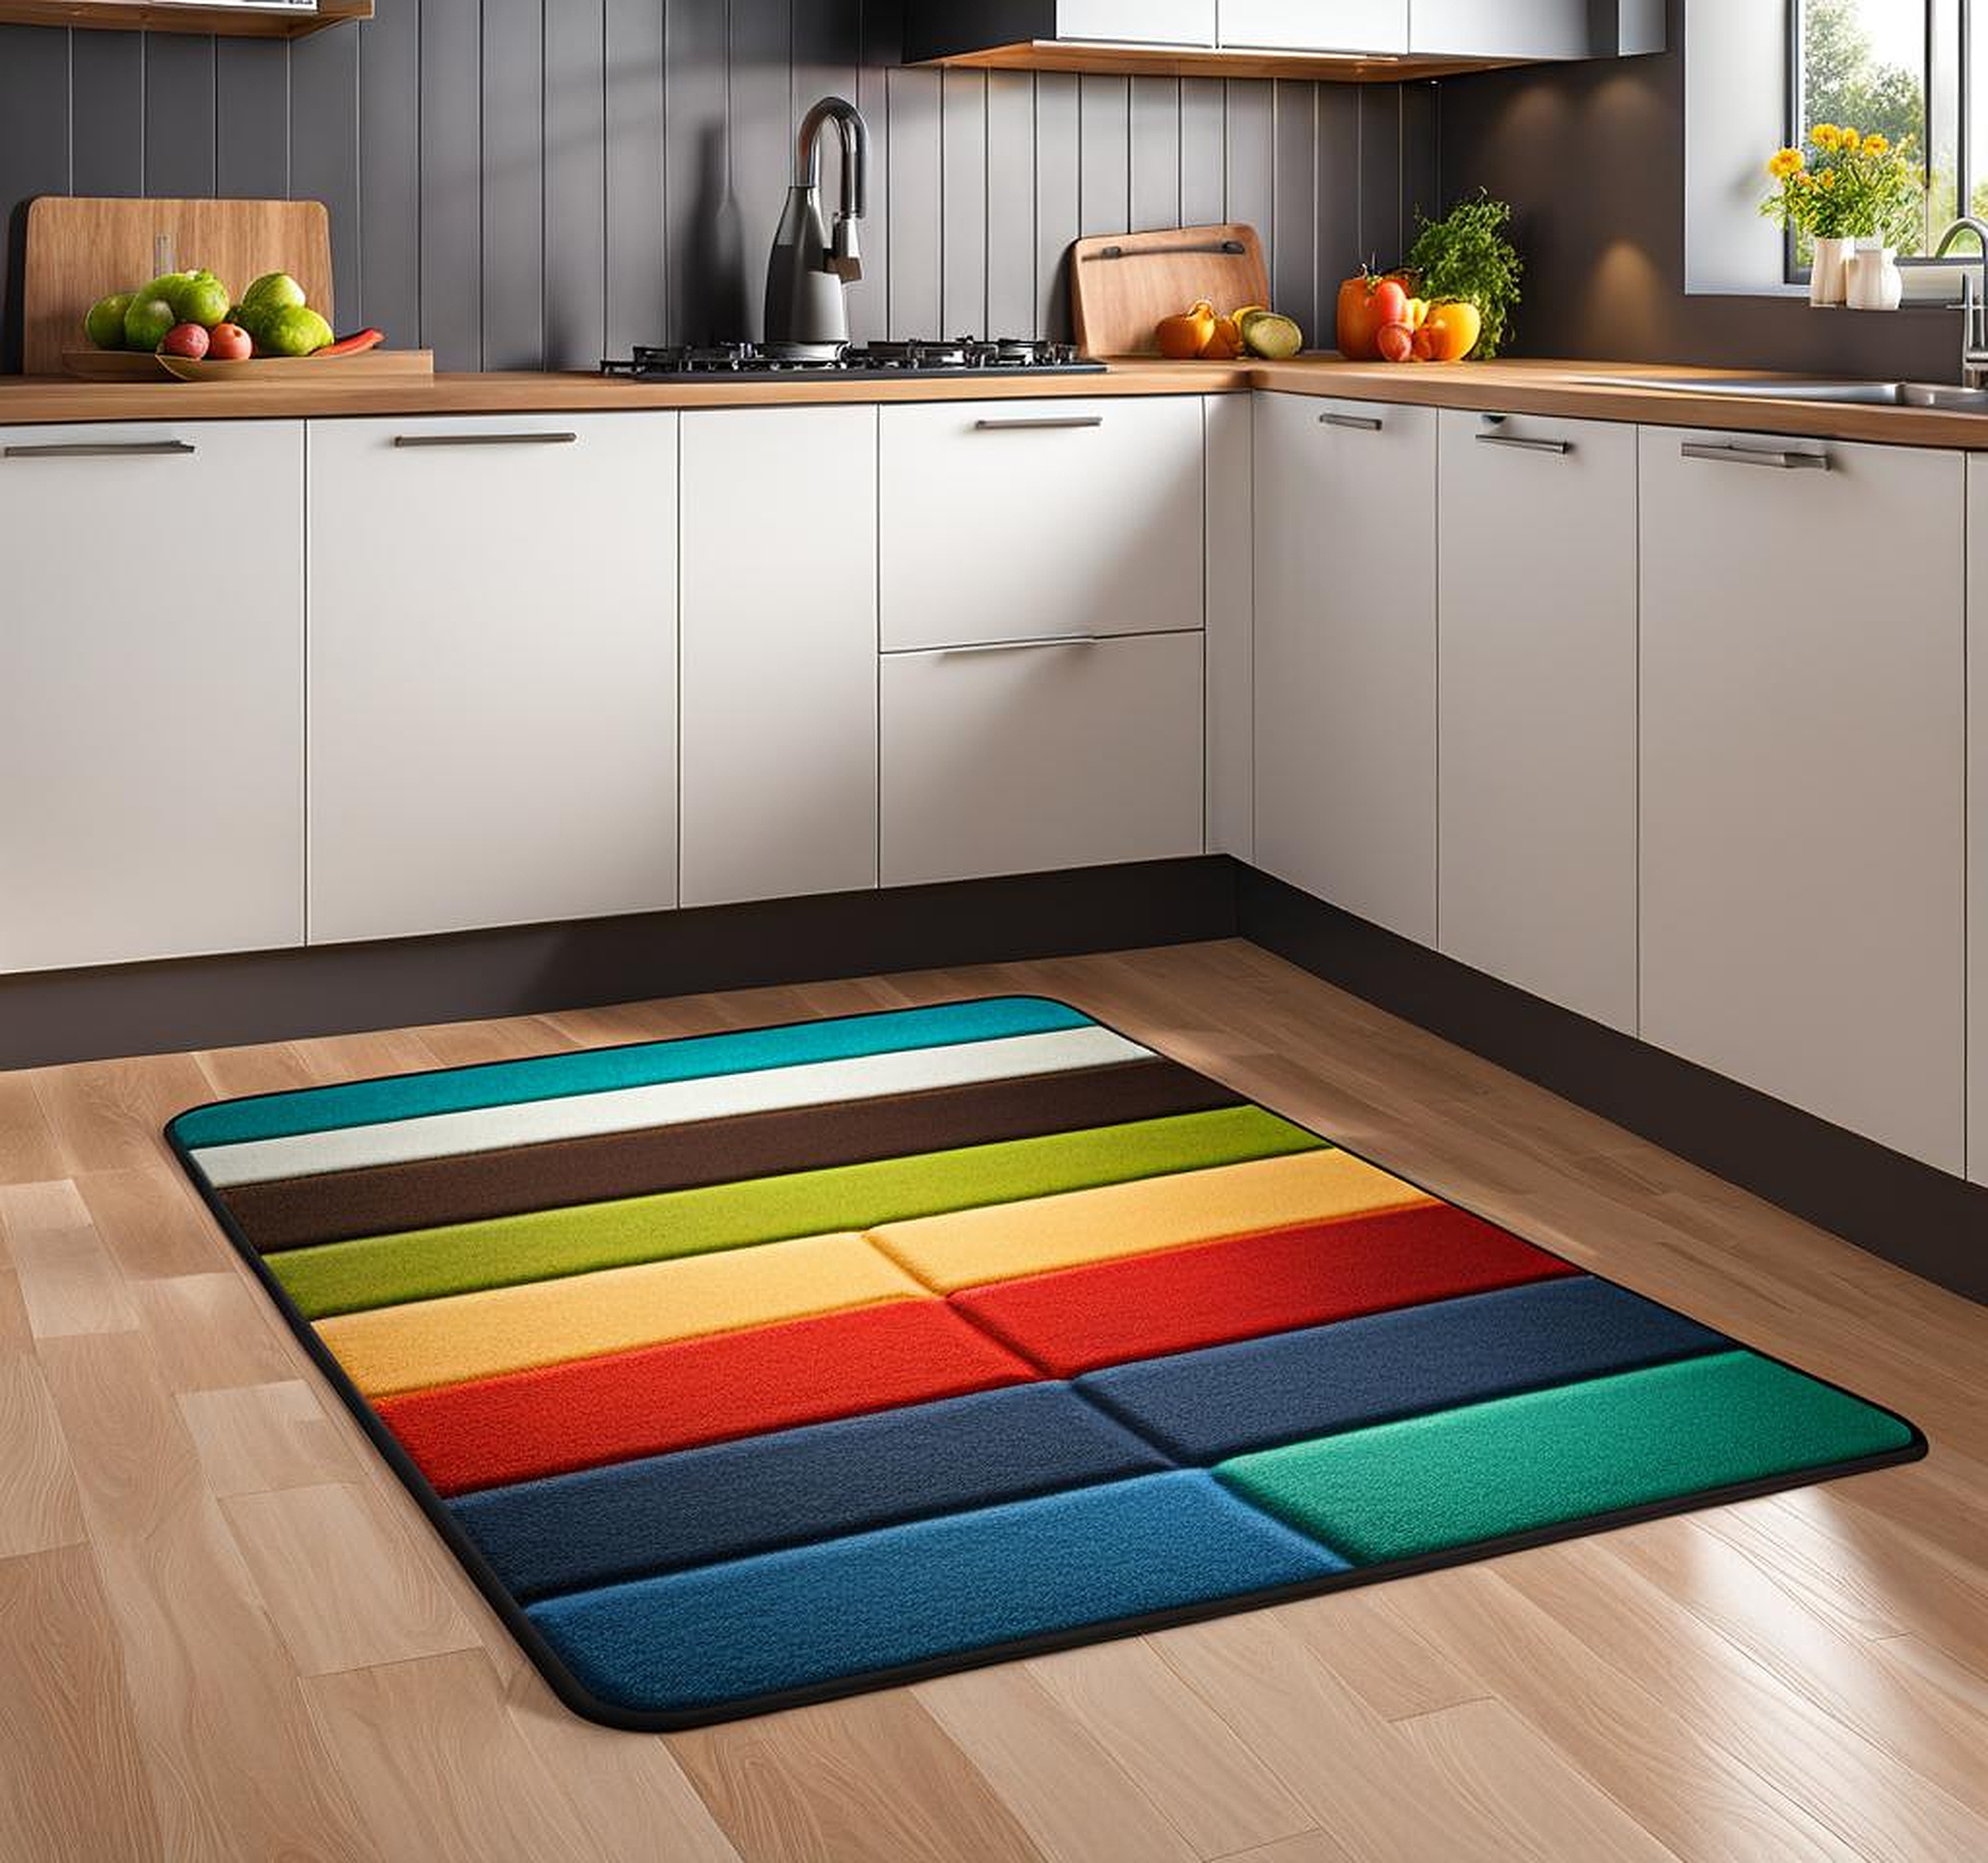 Comfort Mats for the Kitchen – Soft and Cozy Solutions